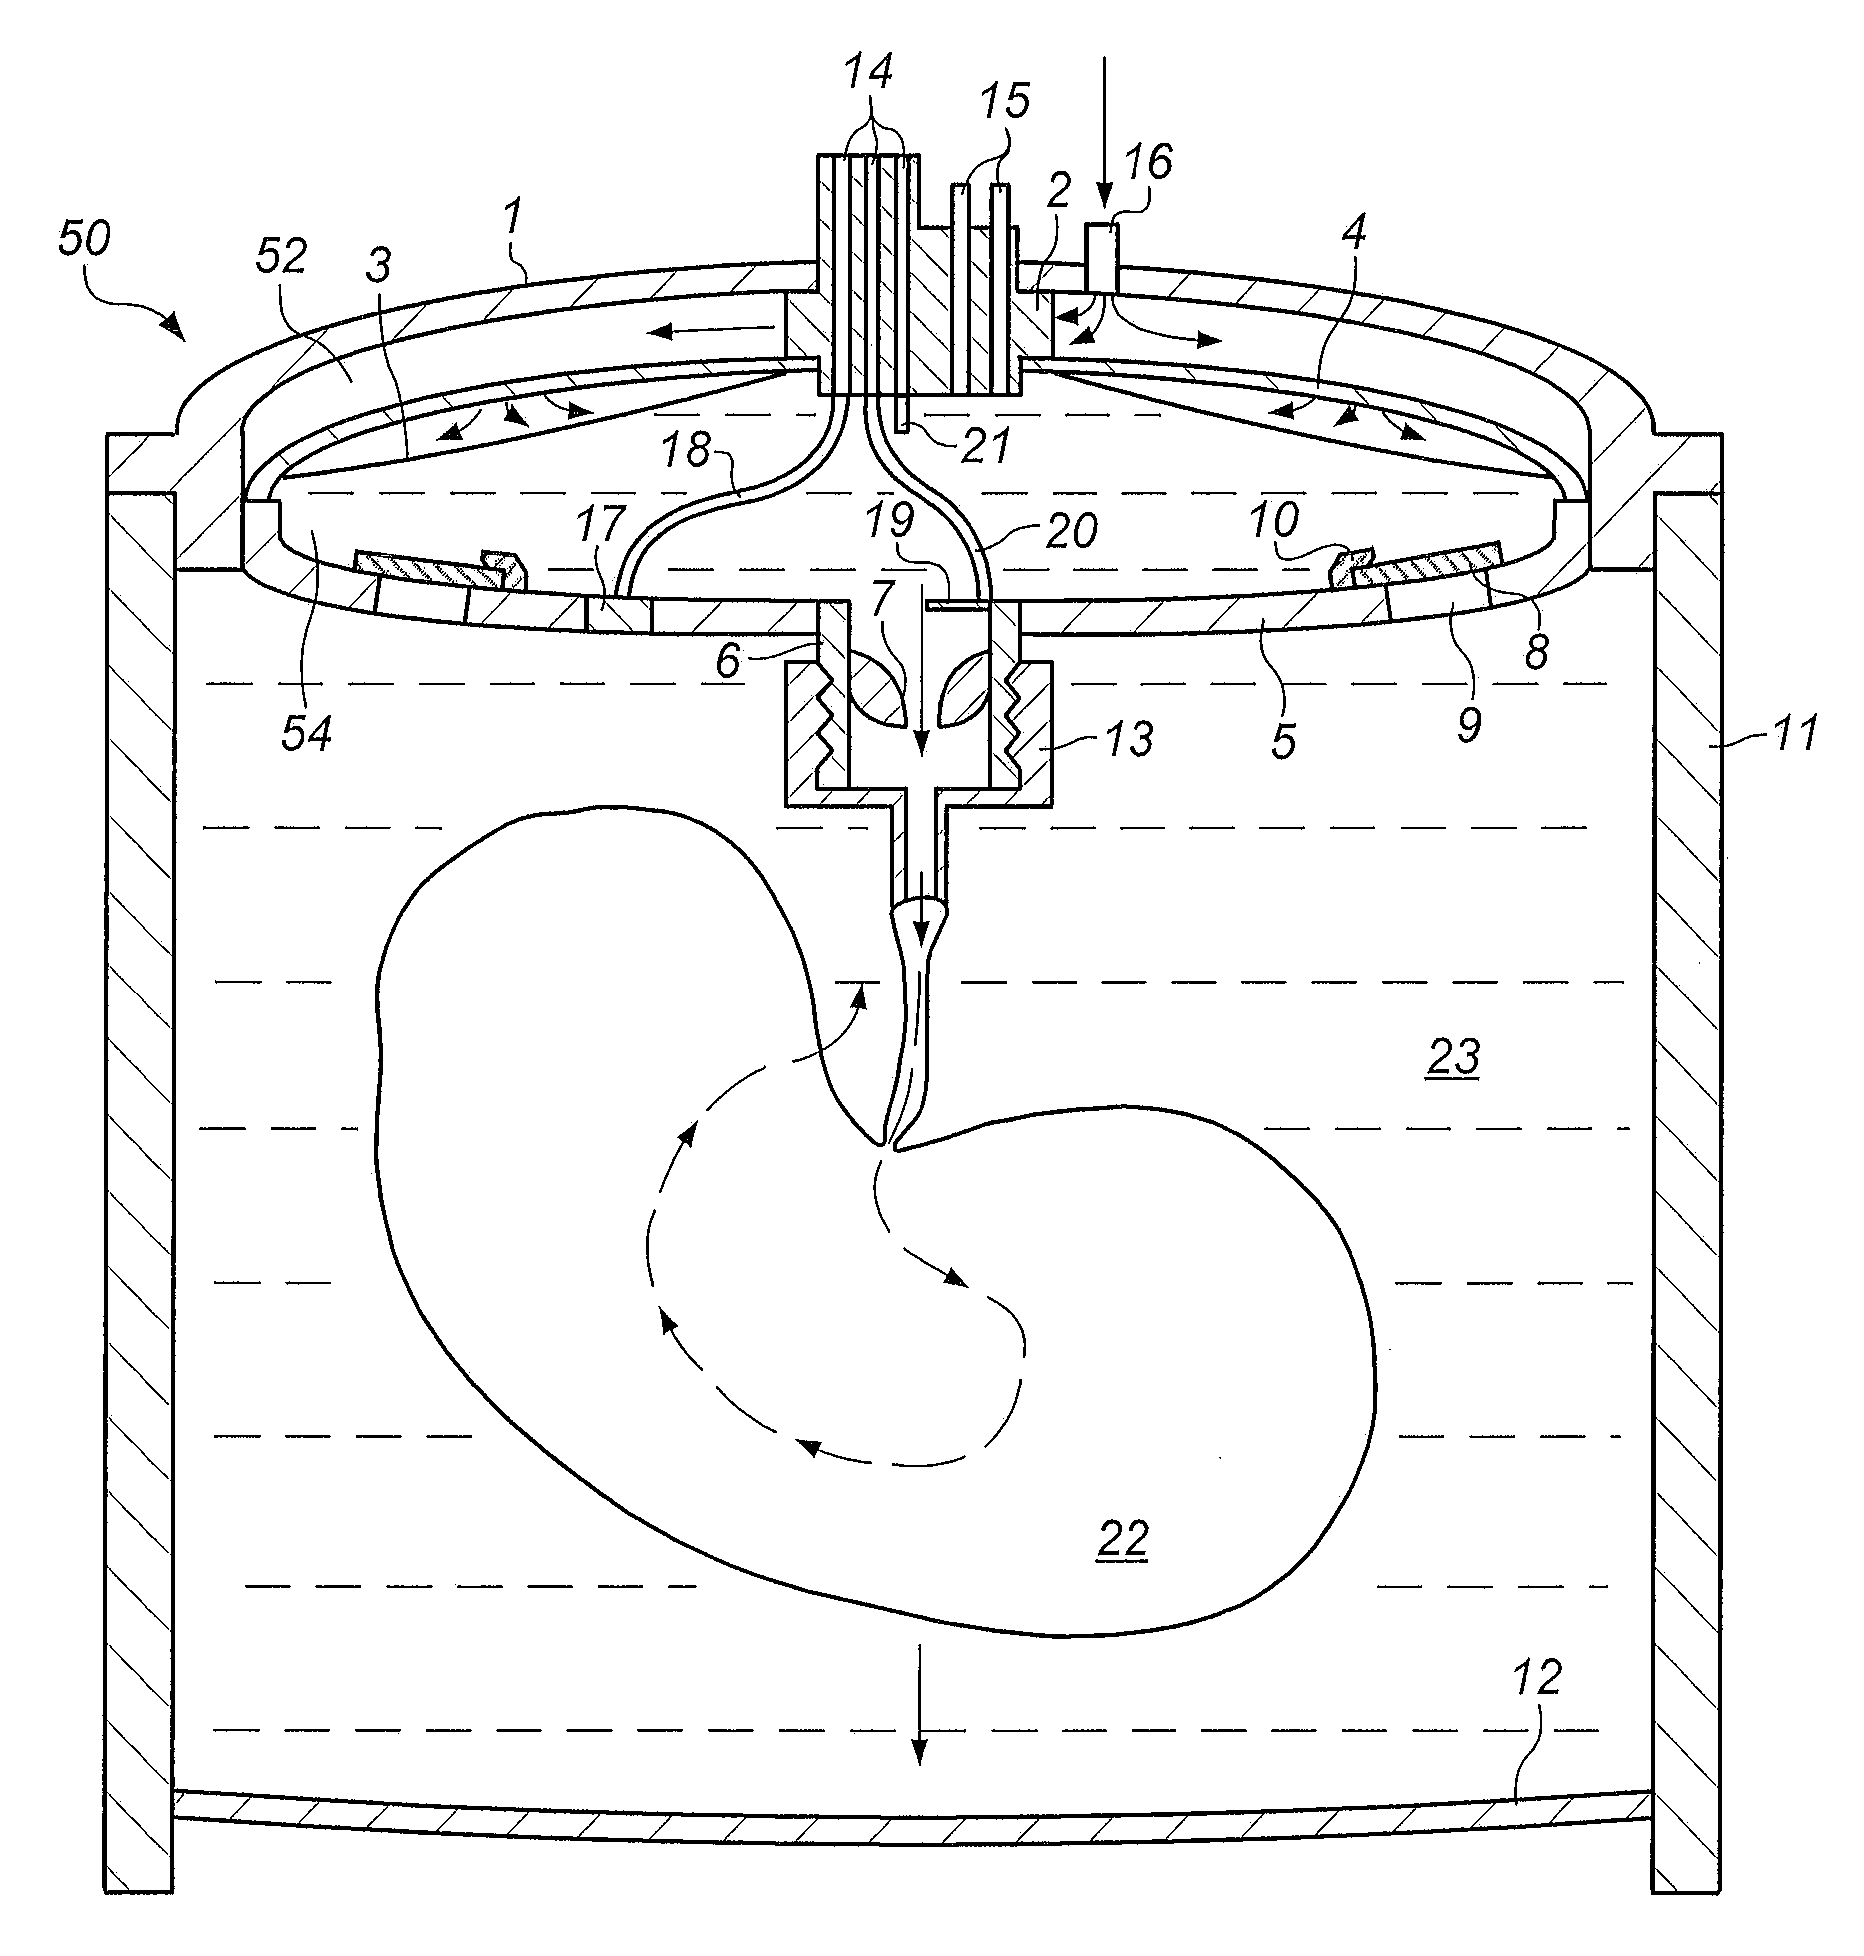 Fluidics based pulsatile perfusion preservation device and method